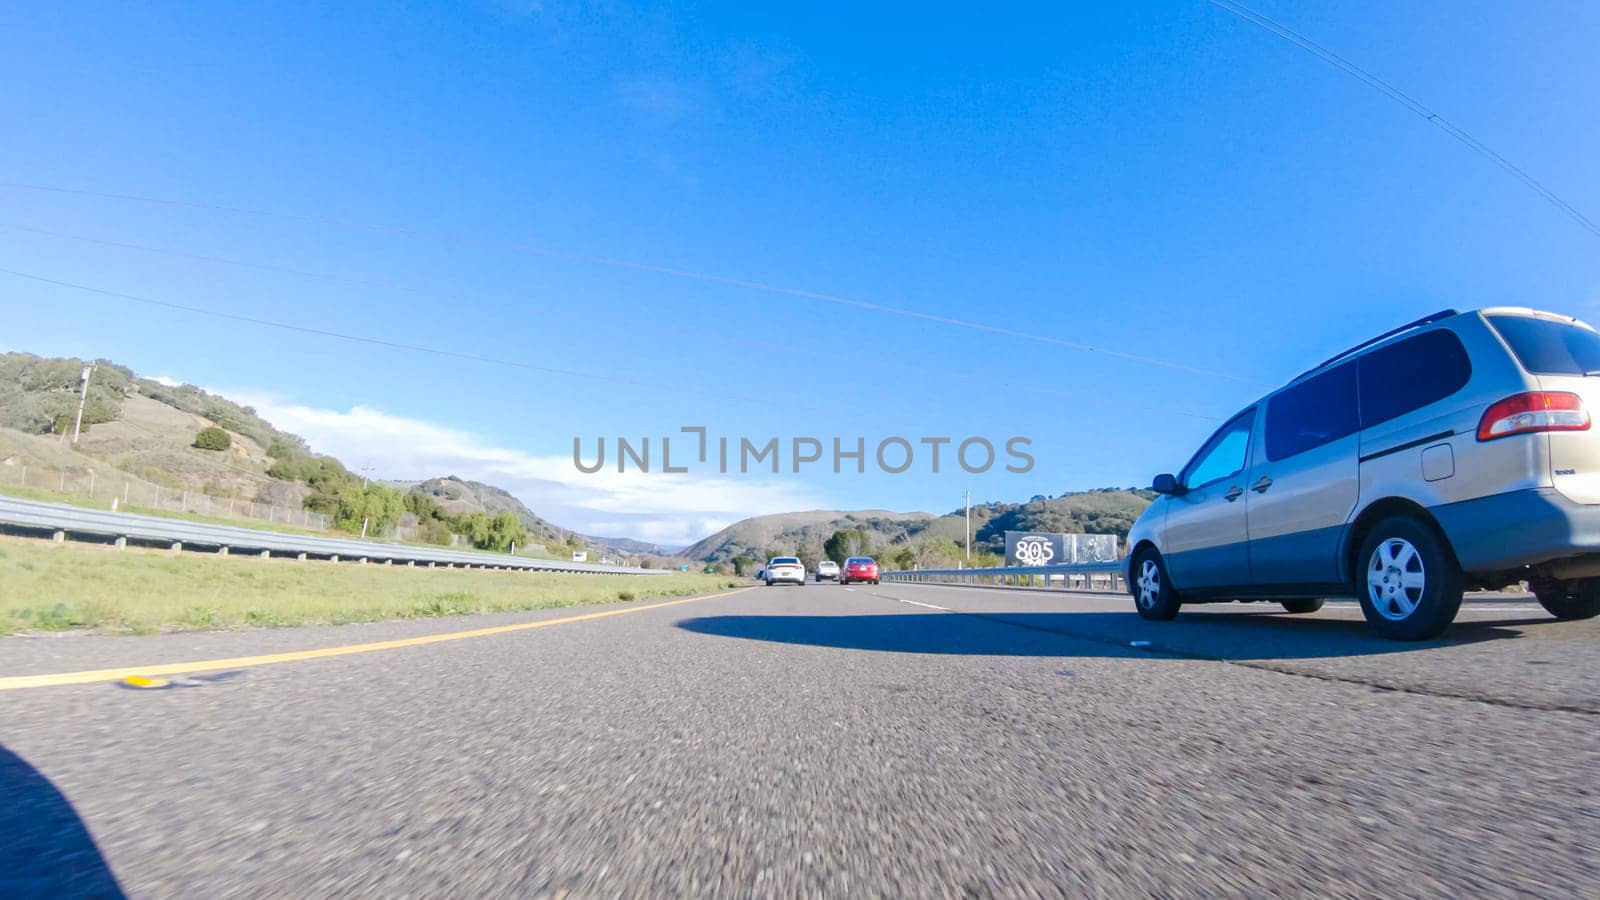 Santa Maria, California, USA-December 6, 2022-On a crisp winter day, a car cruises along the iconic Highway 1 near San Luis Obispo, California. The surrounding landscape is brownish and subdued, with rolling hills and patches of coastal vegetation flanking the winding road.